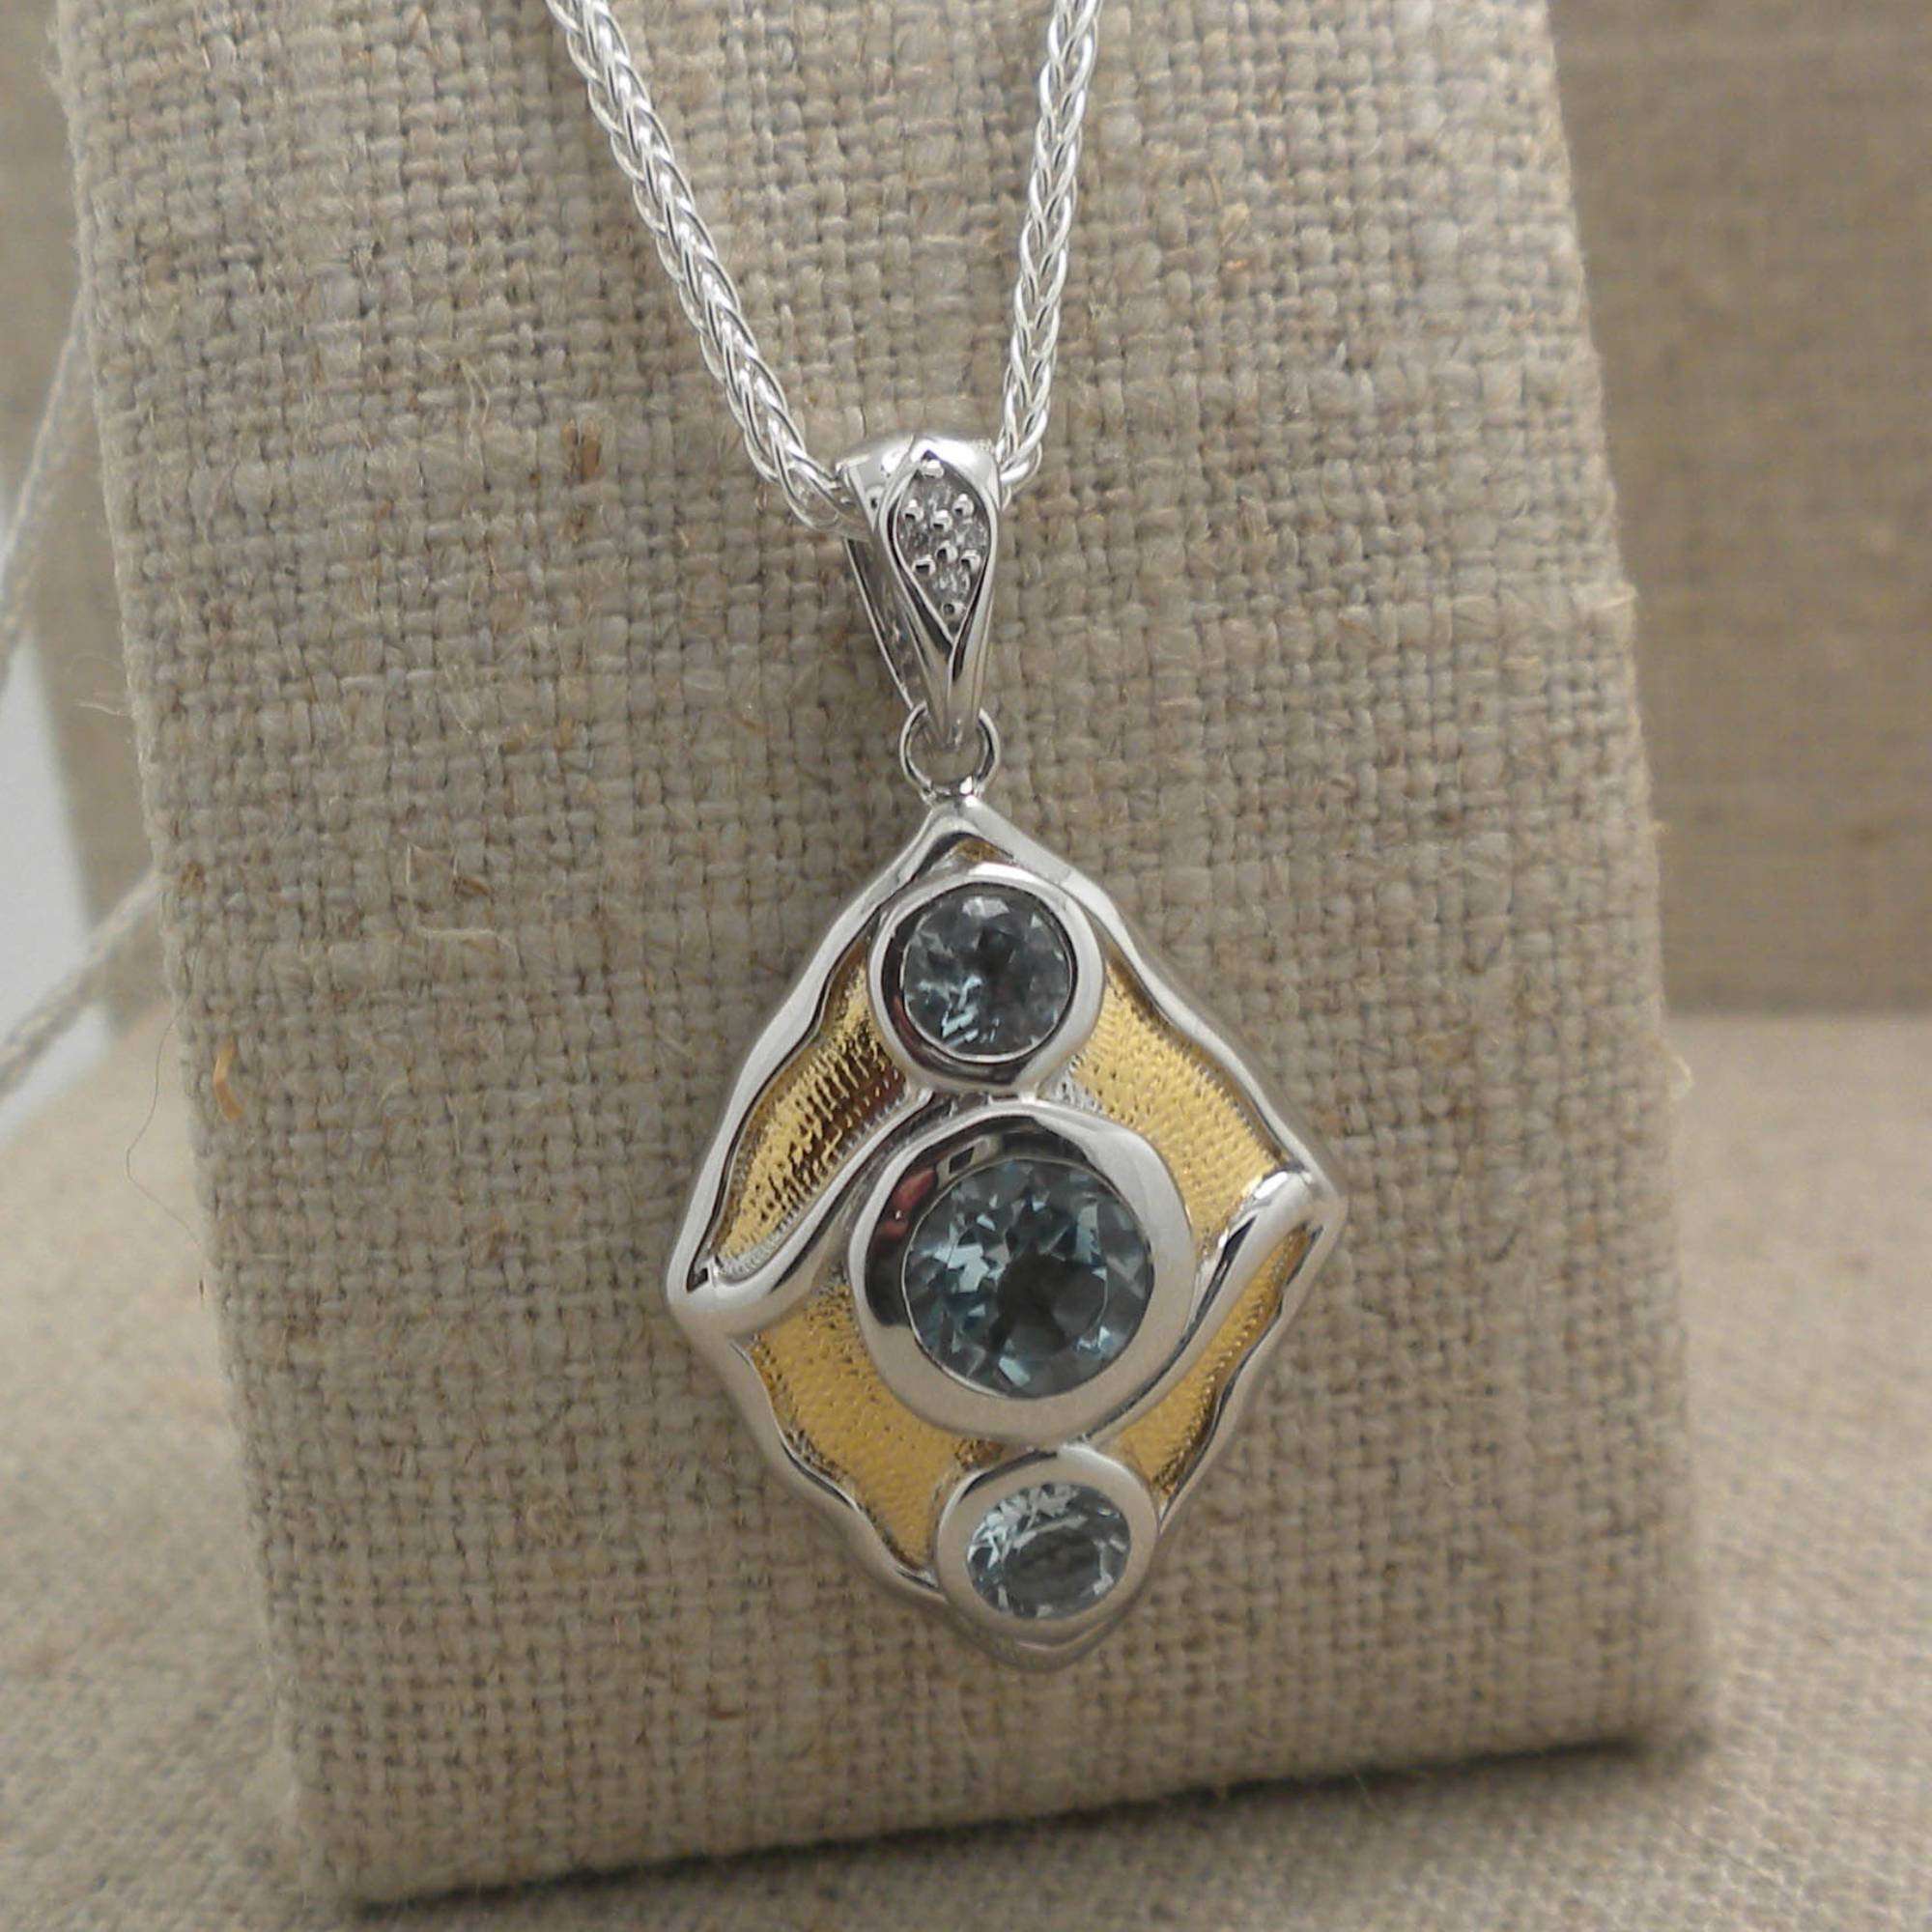 Sterling Silver with 23K Gilding Rocks 'N Rivers Pendant with Sky Blue Topaz 